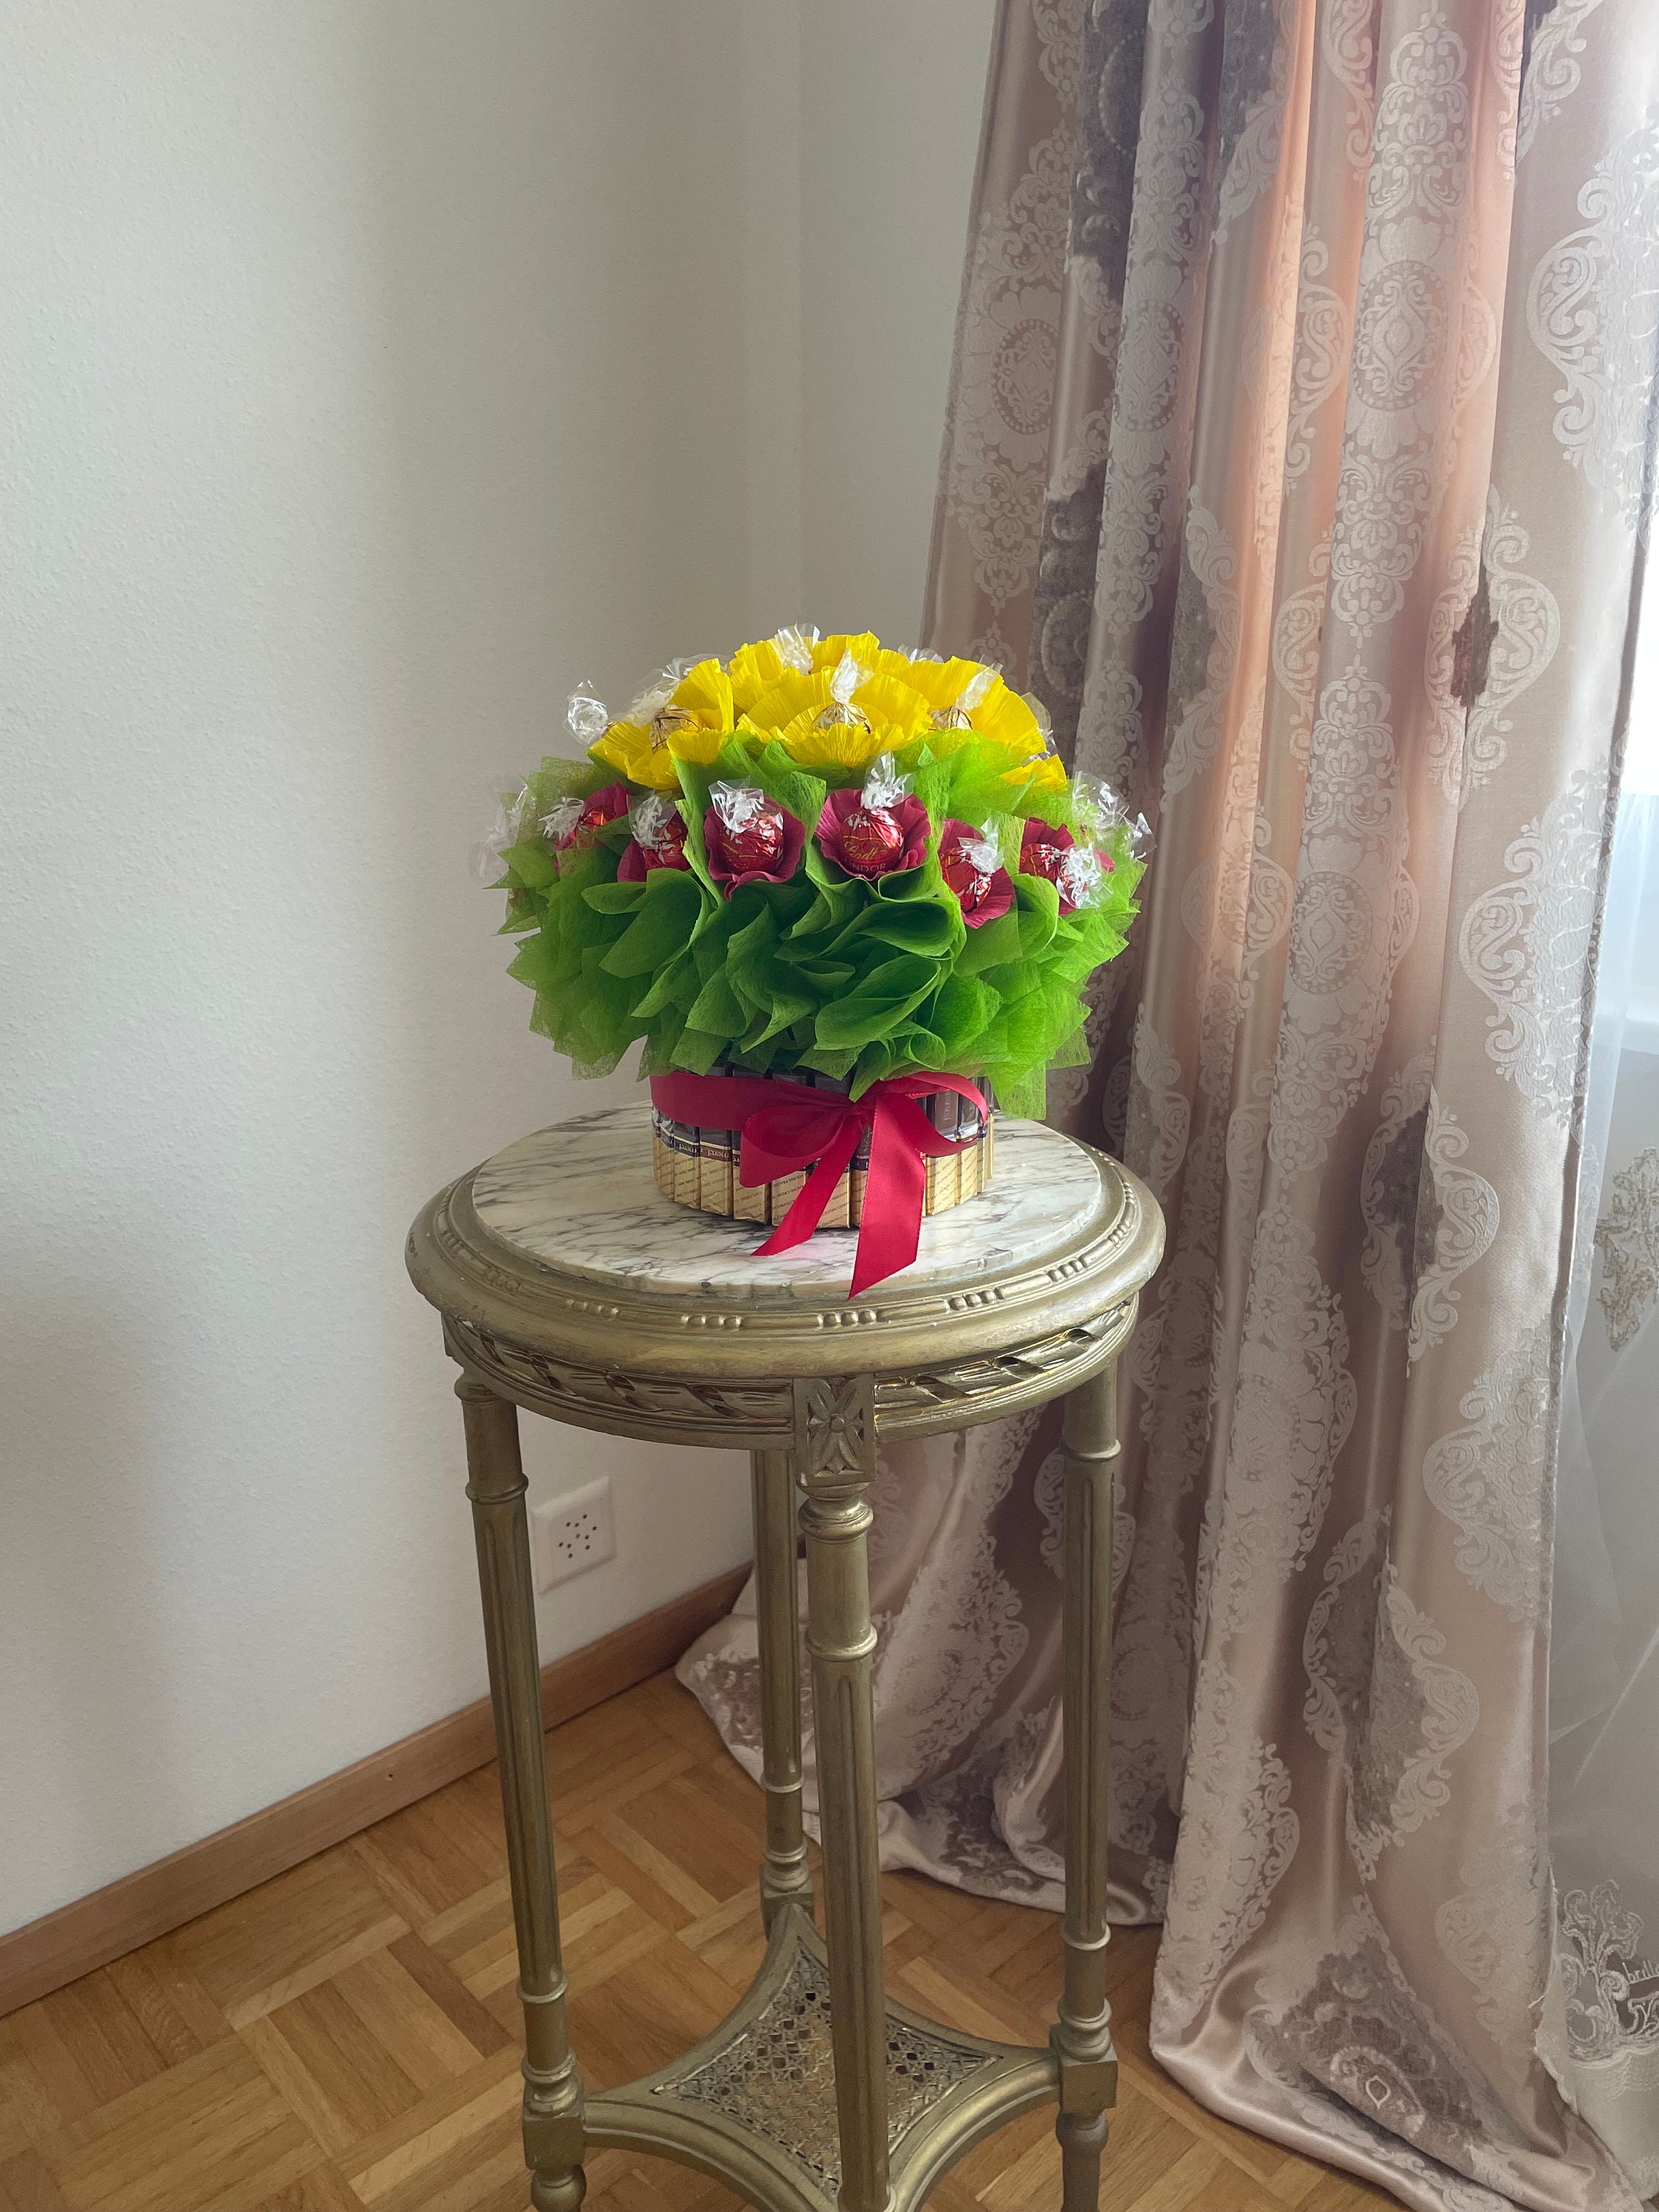 Rolled money bouquet with flowers and Lindor chocolate